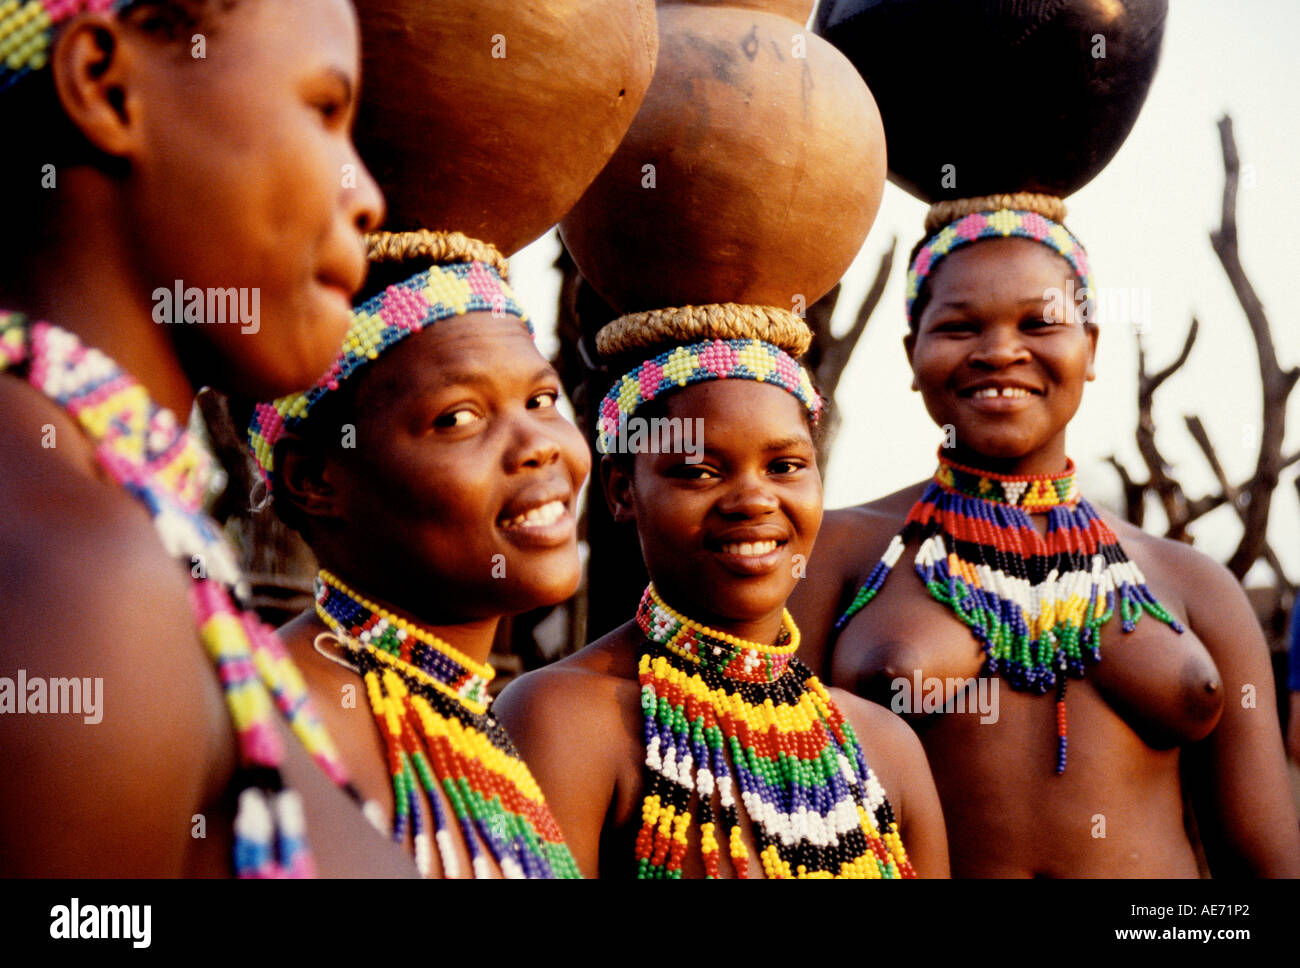 Zulu maidens carrying pots on heads at Shakaland in KwaZulu Natal, South Africa Stock Photo